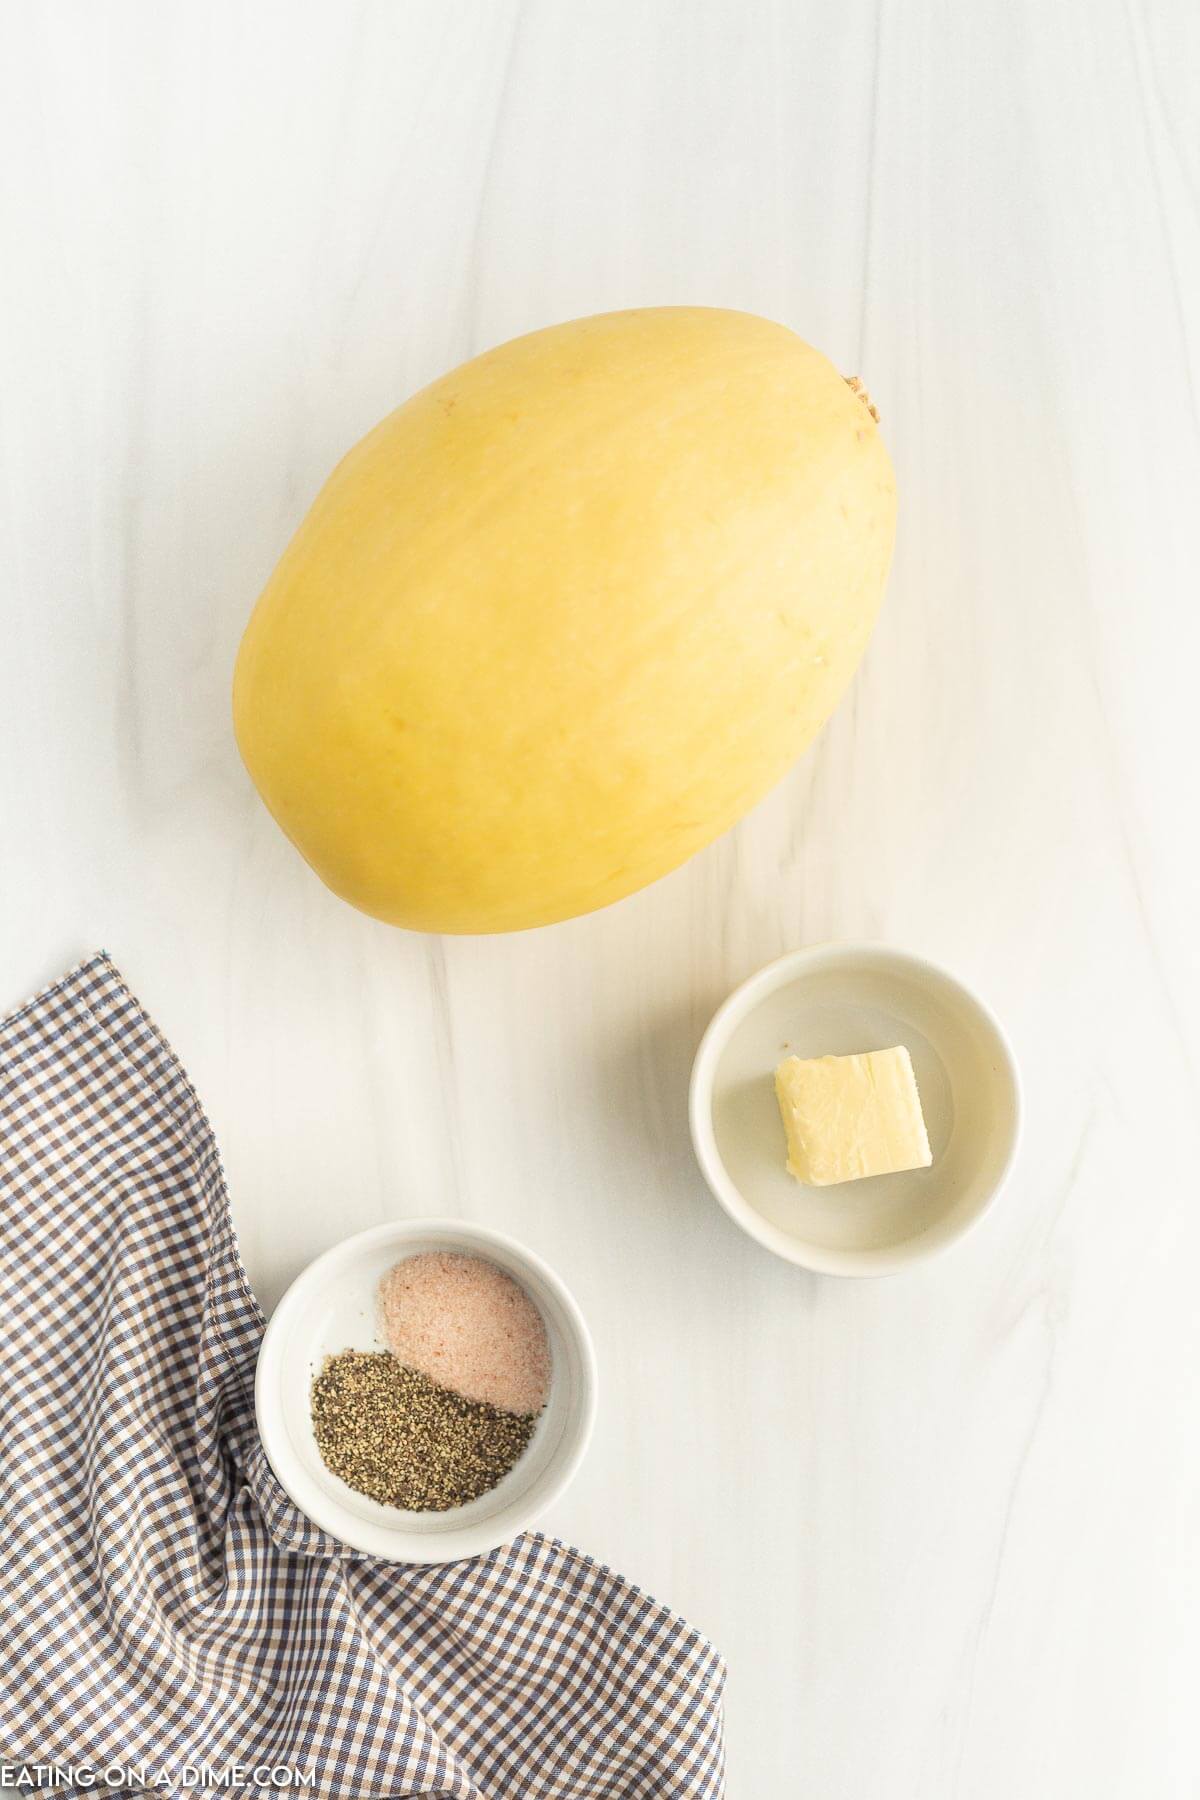 Ingredients needed - spaghetti squash, butter, salt and pepper